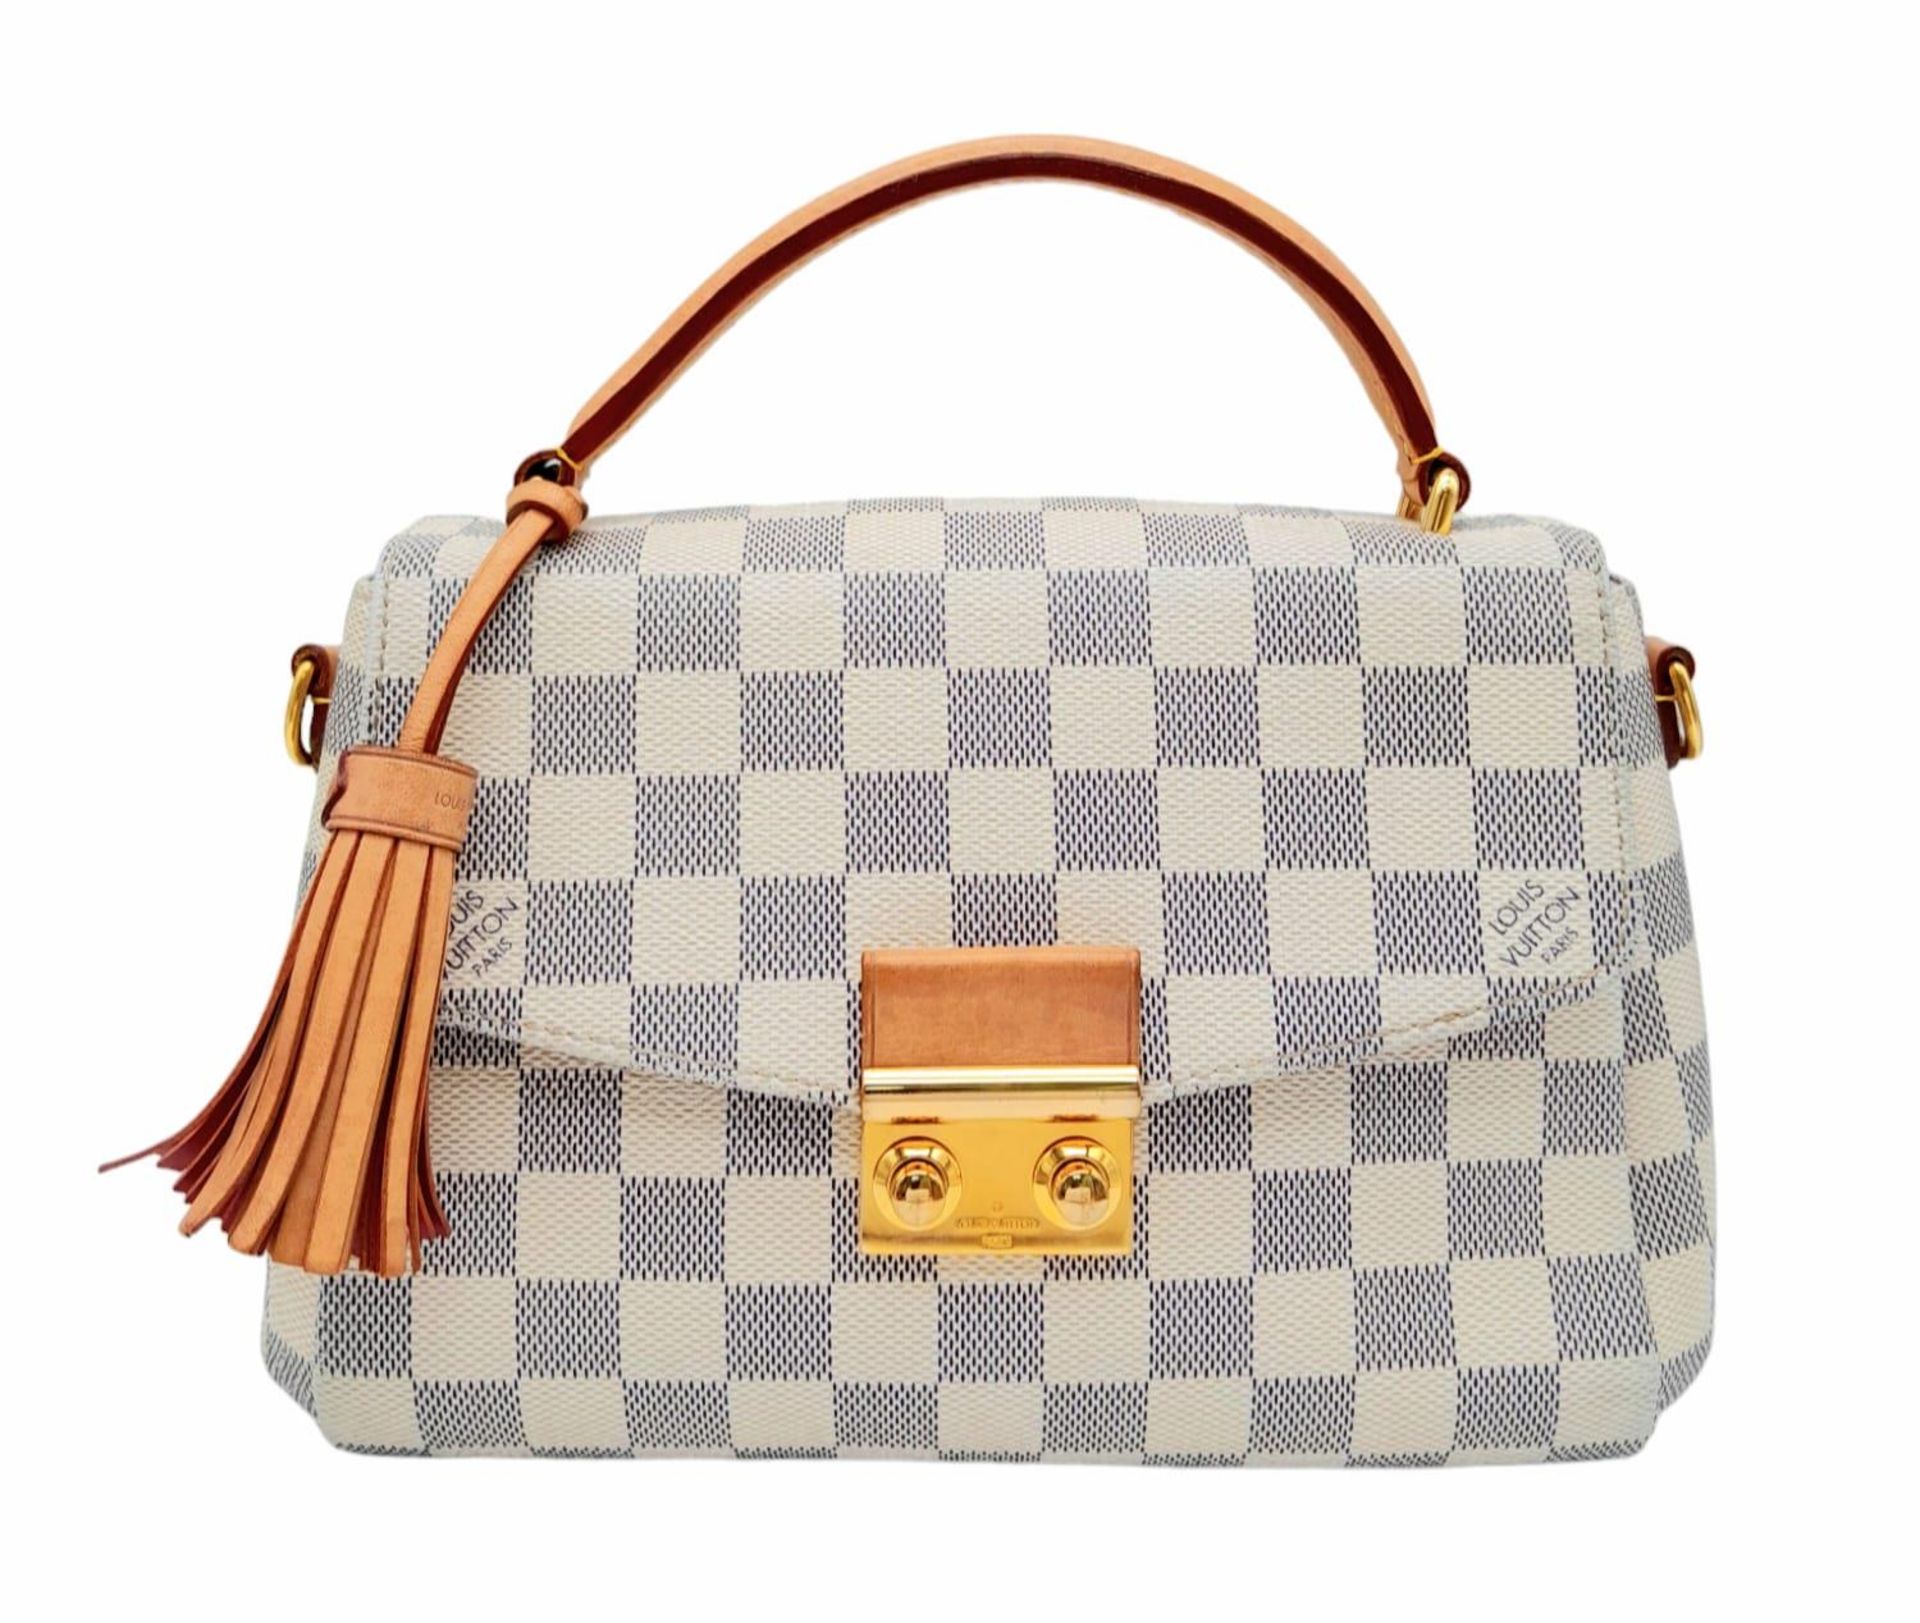 A Louis Vuitton damier canvas Croisette handbag in cream/blue, interior is baby pink. Leather handle - Image 3 of 12